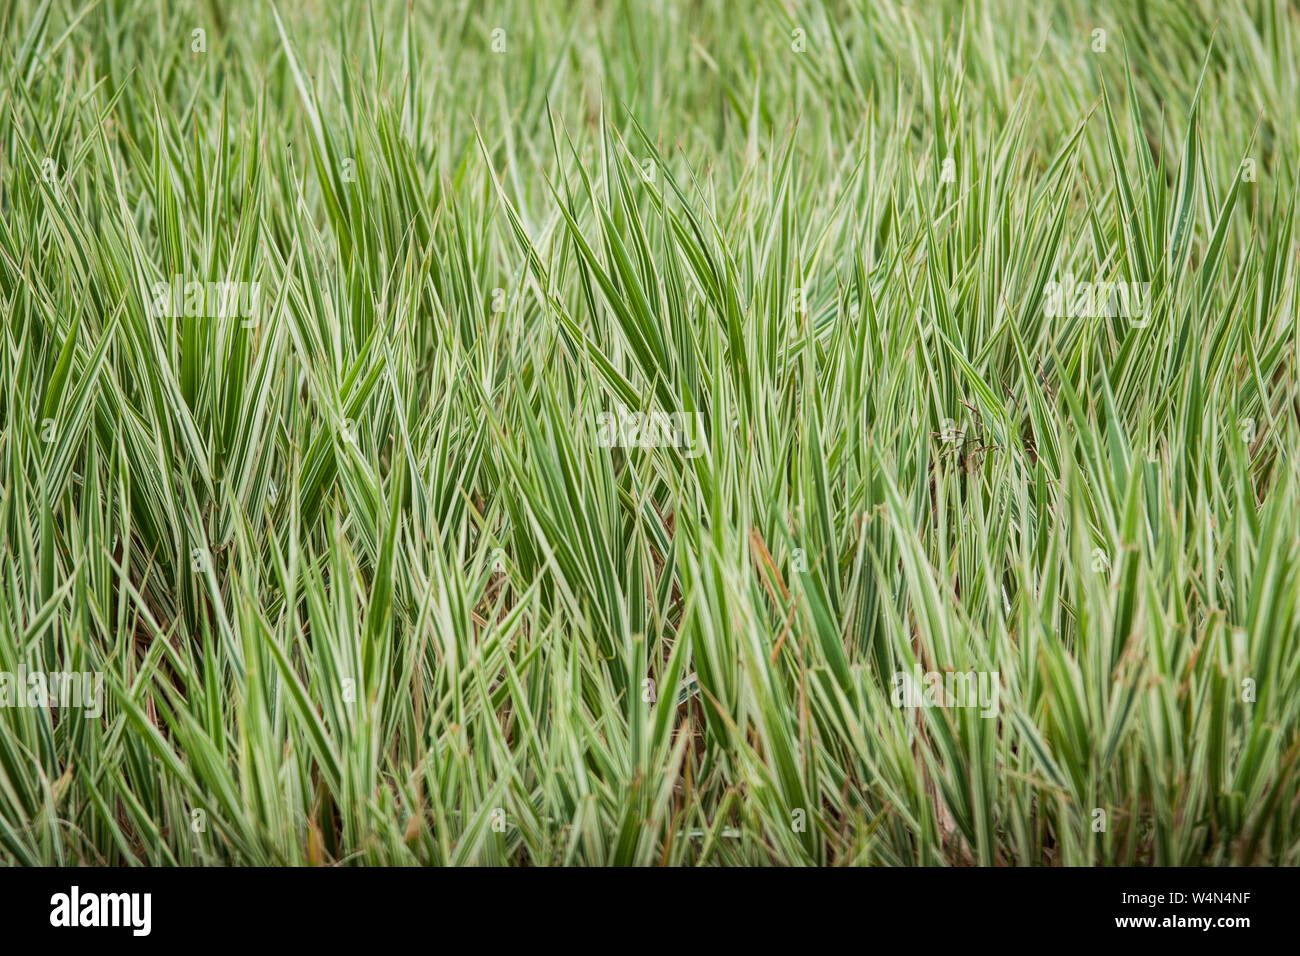 Green and cream striped or variegated grass standing in the breeze. Background or texture. Stock Photo